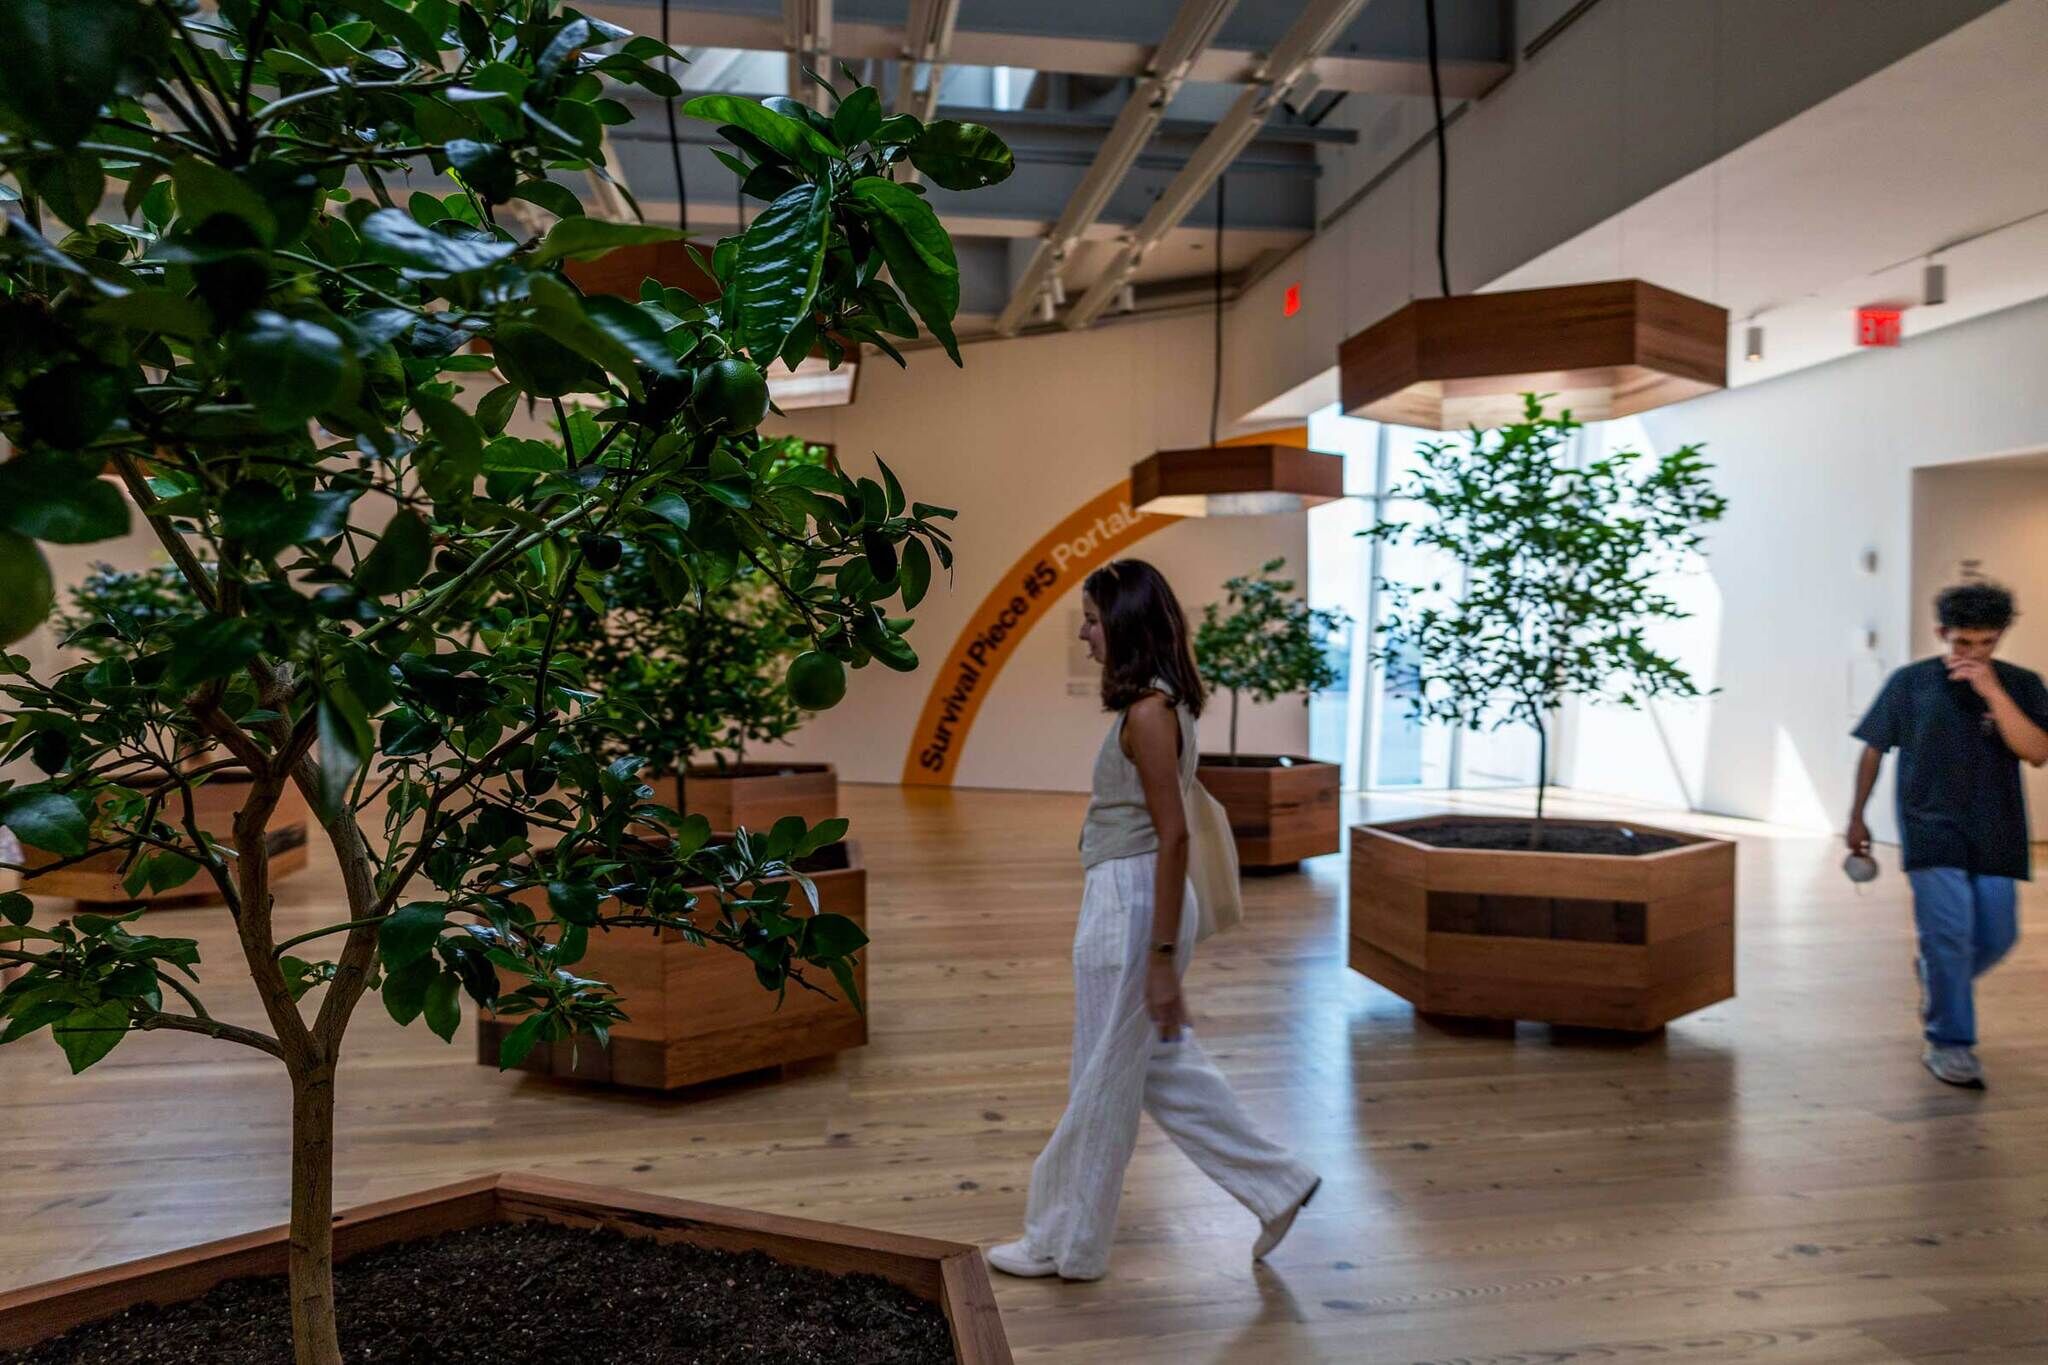 Two people walk through an indoor space with potted trees and a sign reading "Survival Piece #5 Portal."